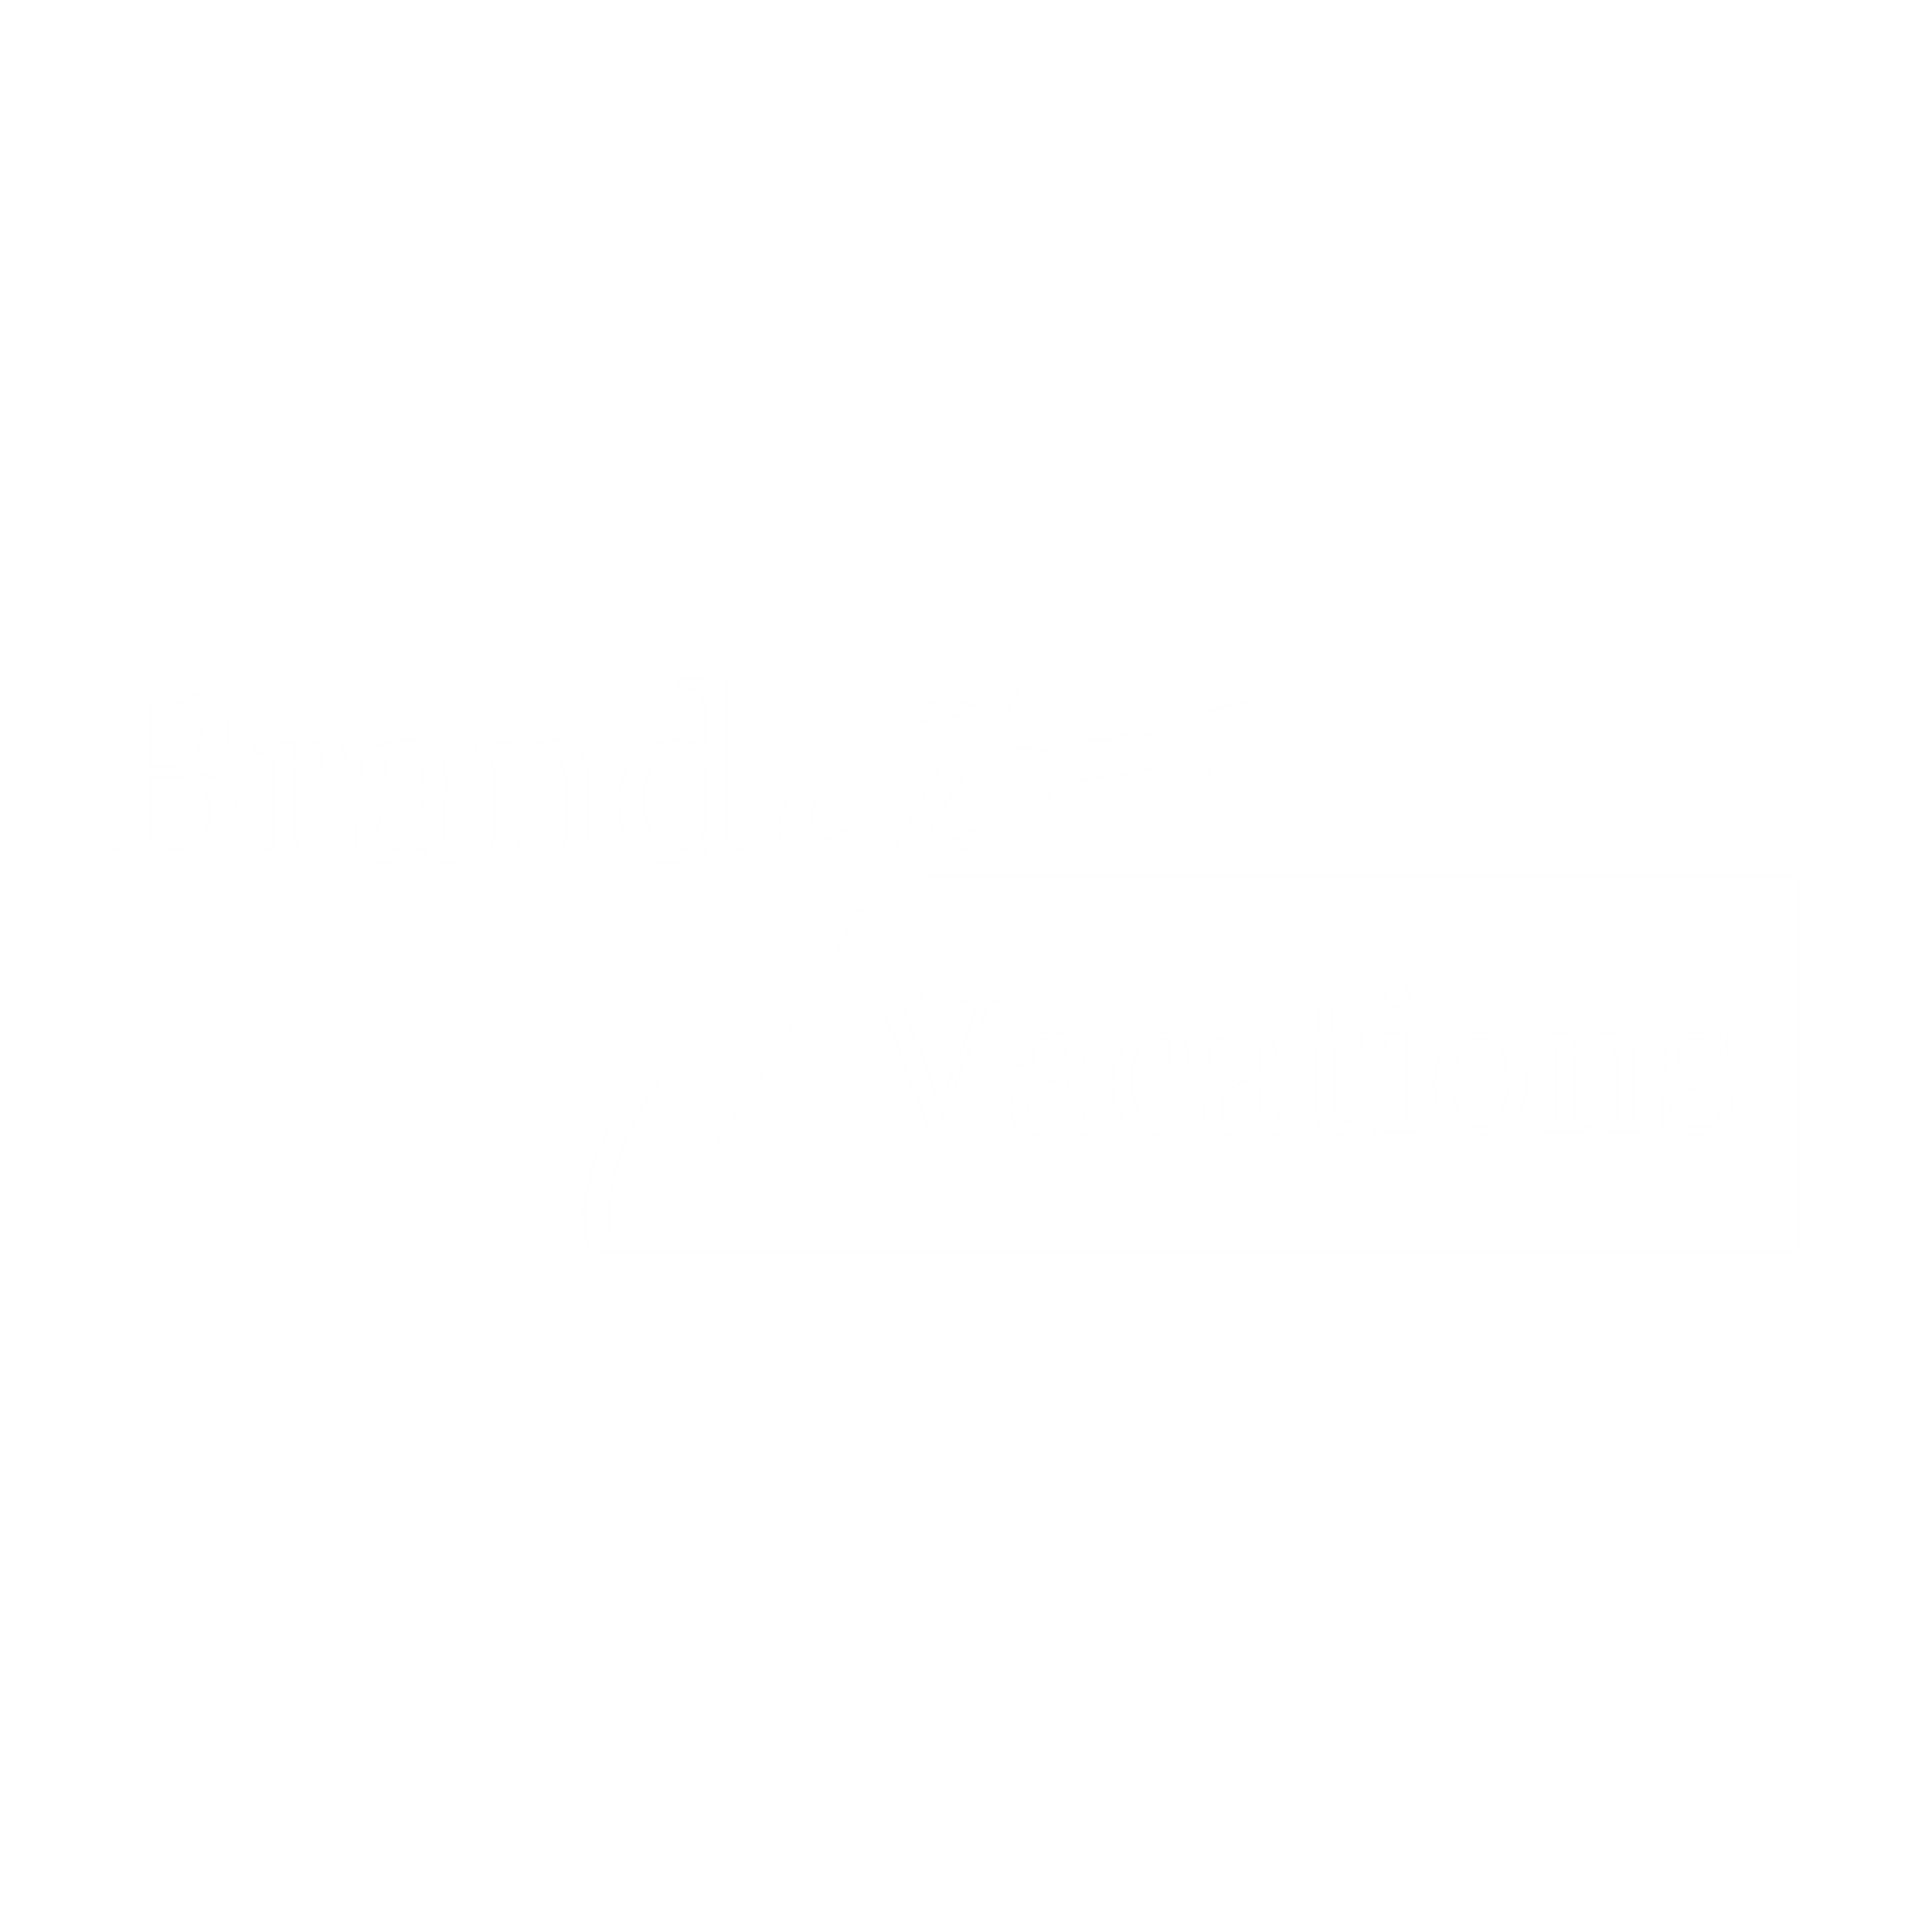 The text "Brand G Vacations" with a little airplane flying off the end